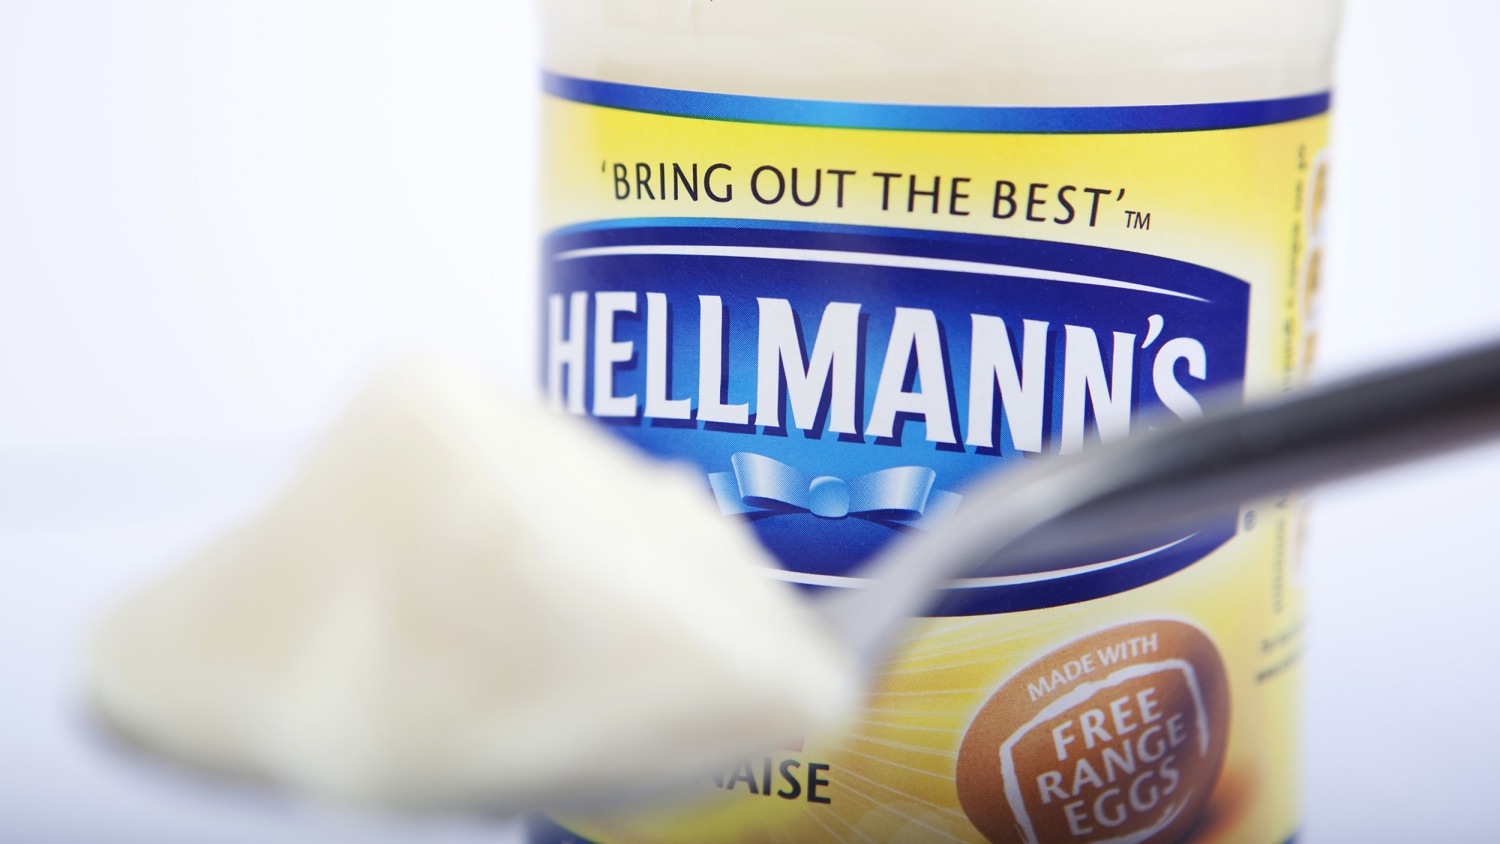 Want mayo with that? Of course you do!